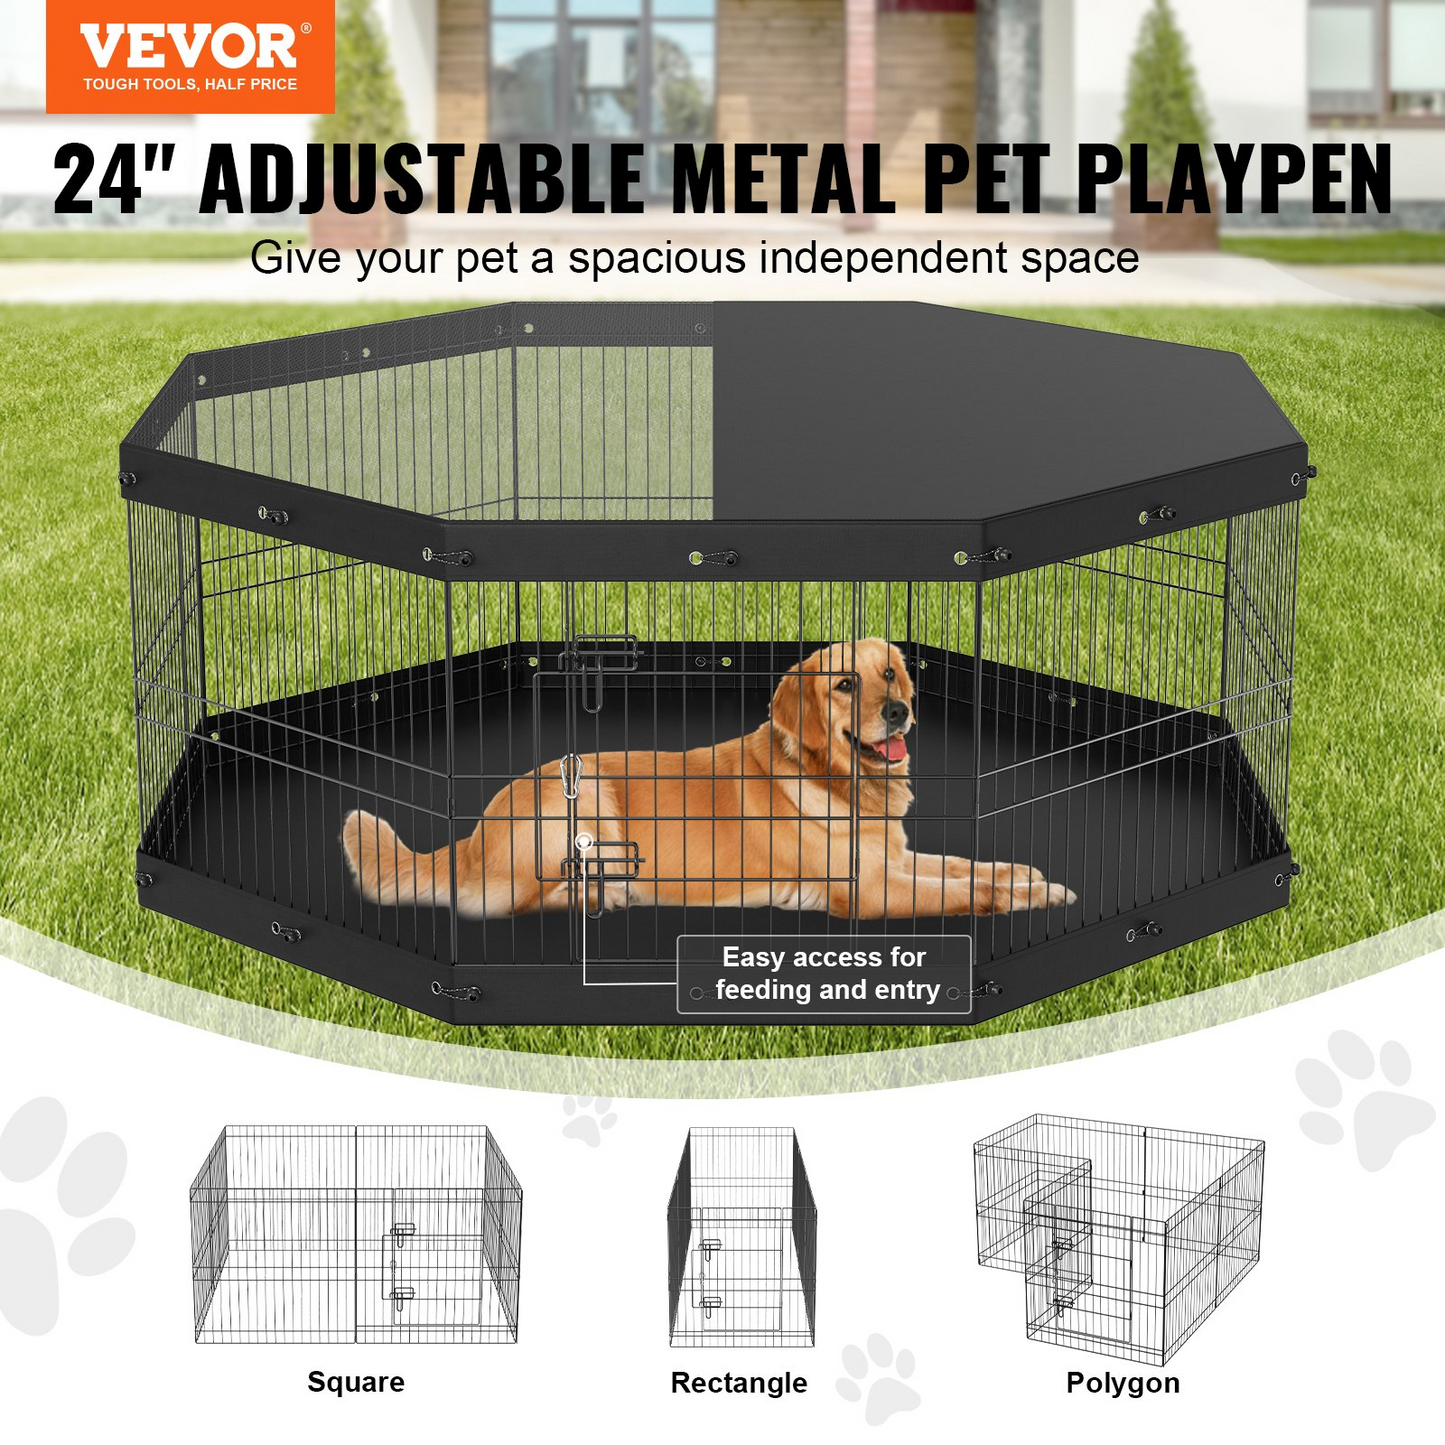 VEVOR Dog Playpen, 8 Panels Foldable Metal Dog Exercise Pen with Top Cover and Bottom Pad, 24" H Pet Fence Puppy Crate Kennel, Indoor Outdoor Dog Pen for Small Medium Pets, for Camping, Yard, Goodies N Stuff